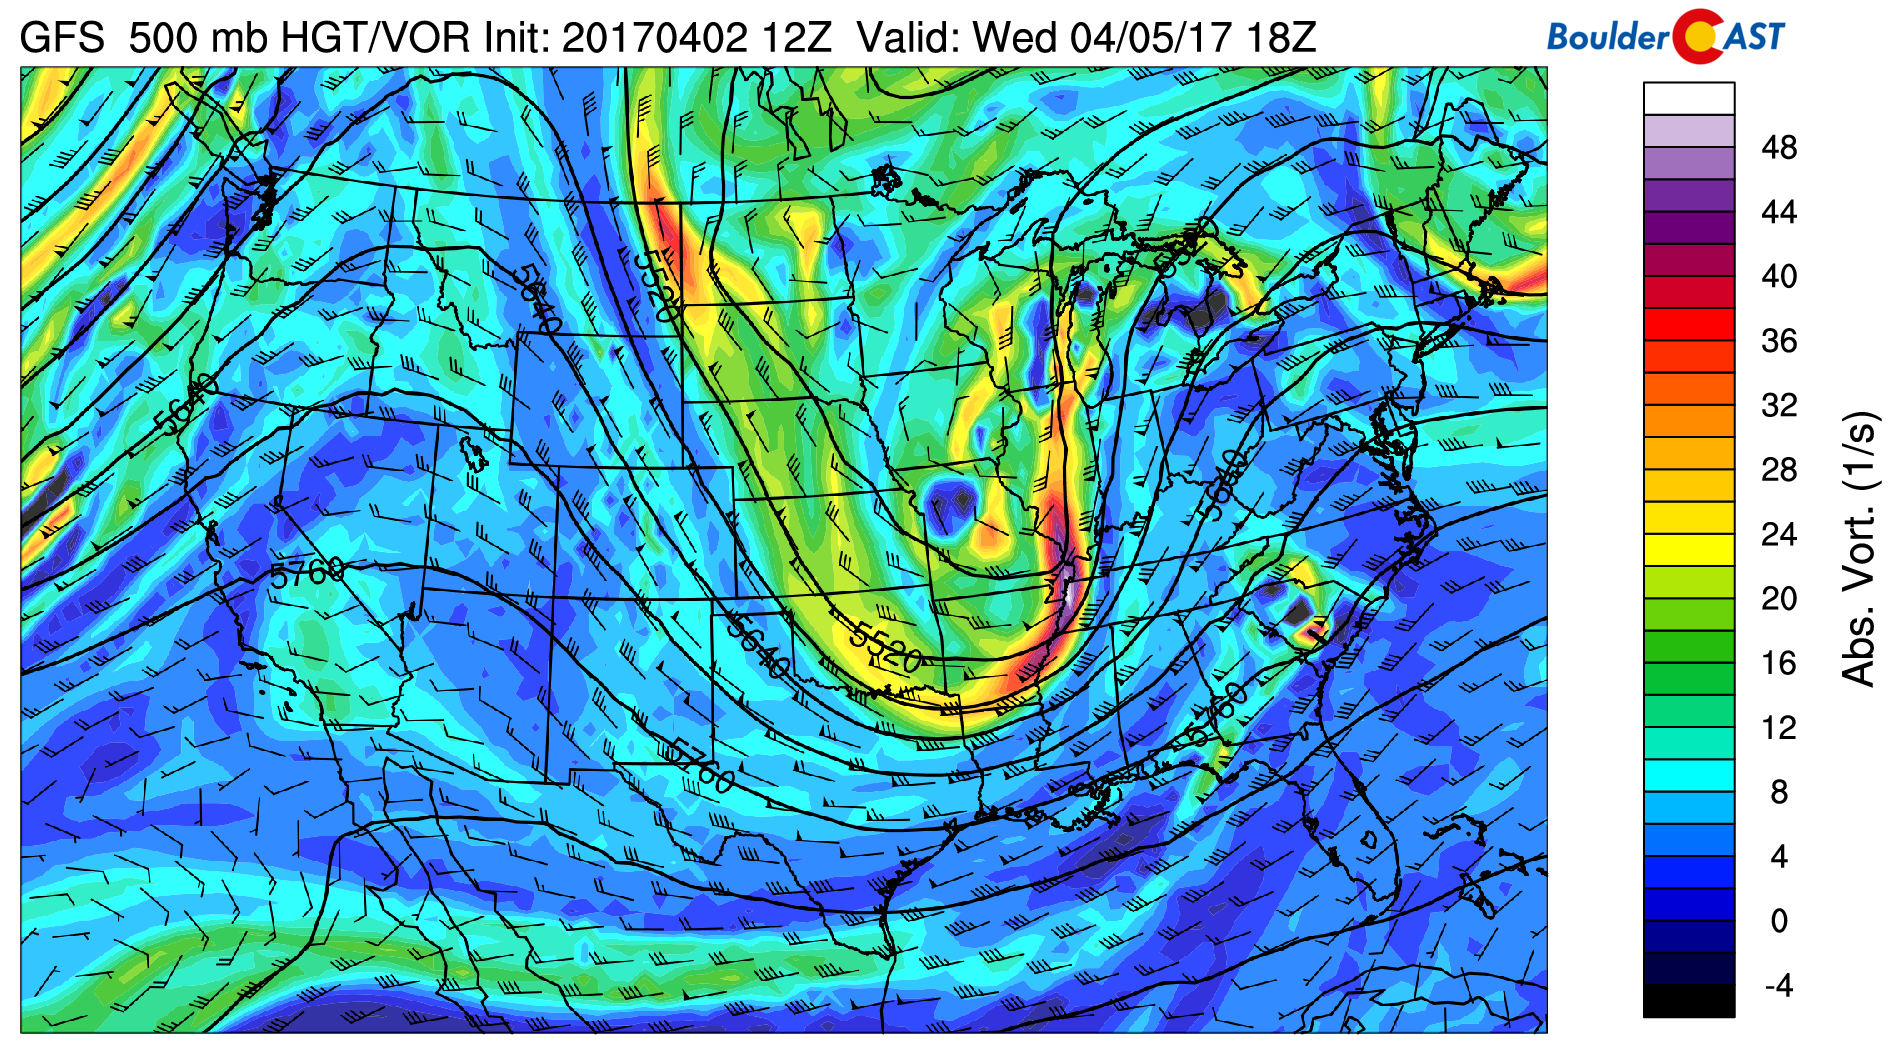 GFS 500 mb mid-level flow for Wednesday